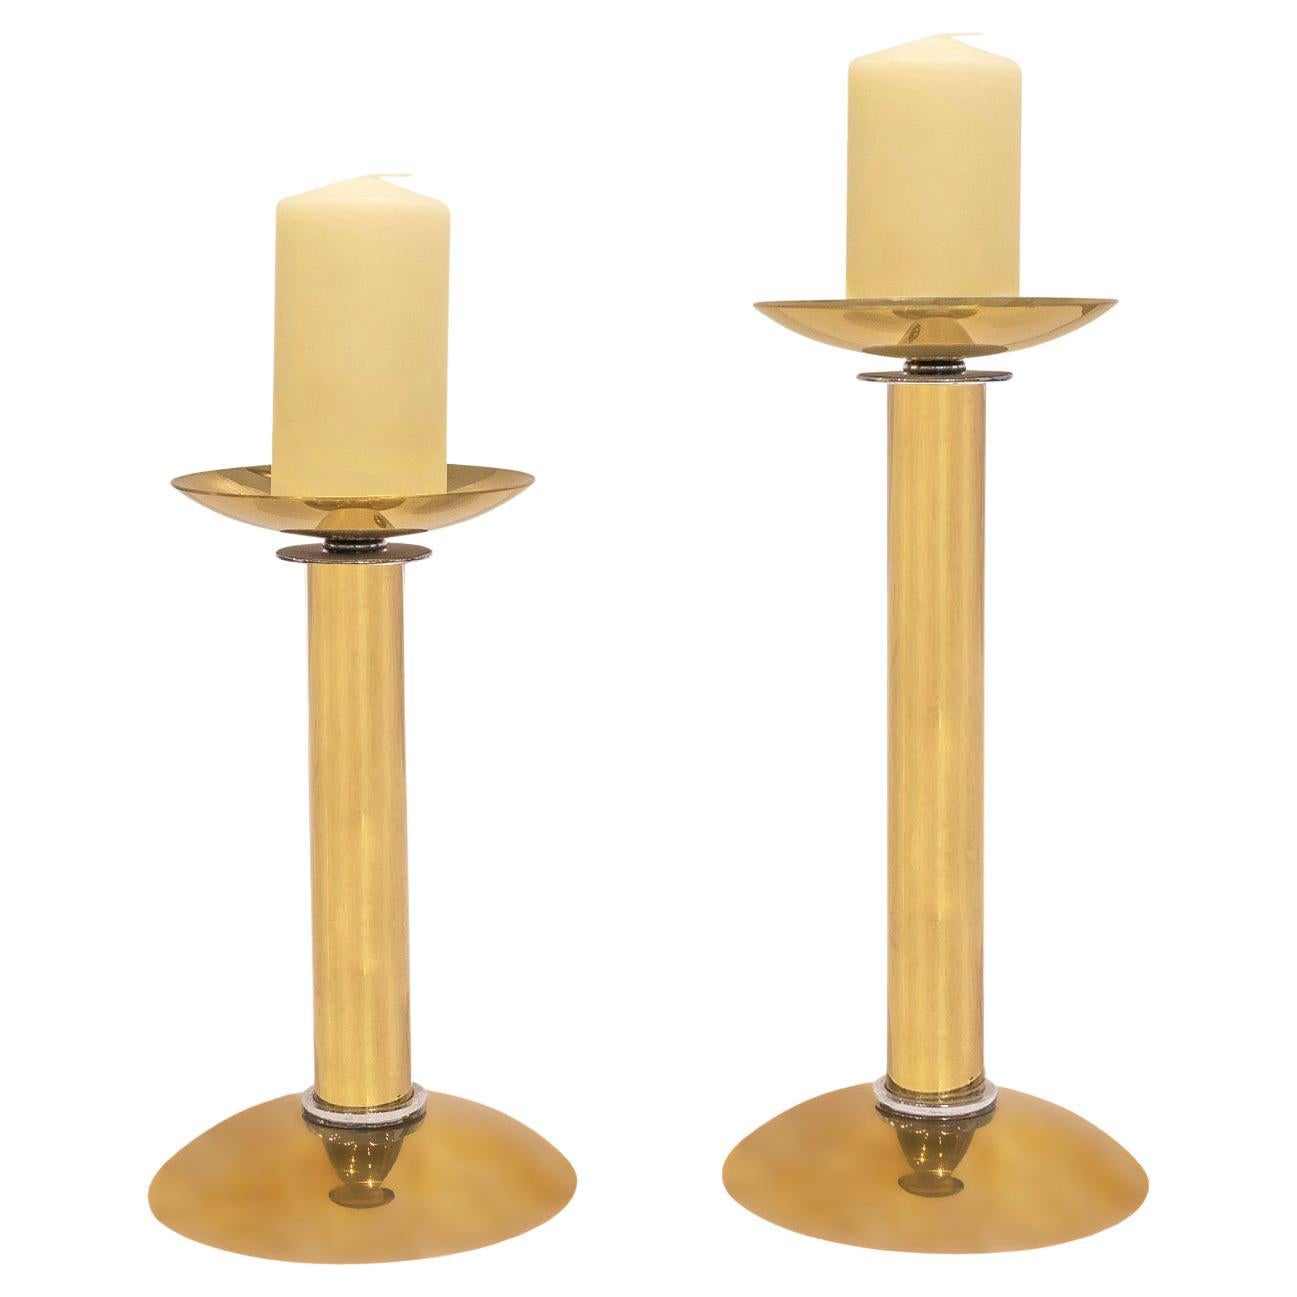 Karl Springer Pair of Candle Holders in Brass with Chrome Accents, 1980s